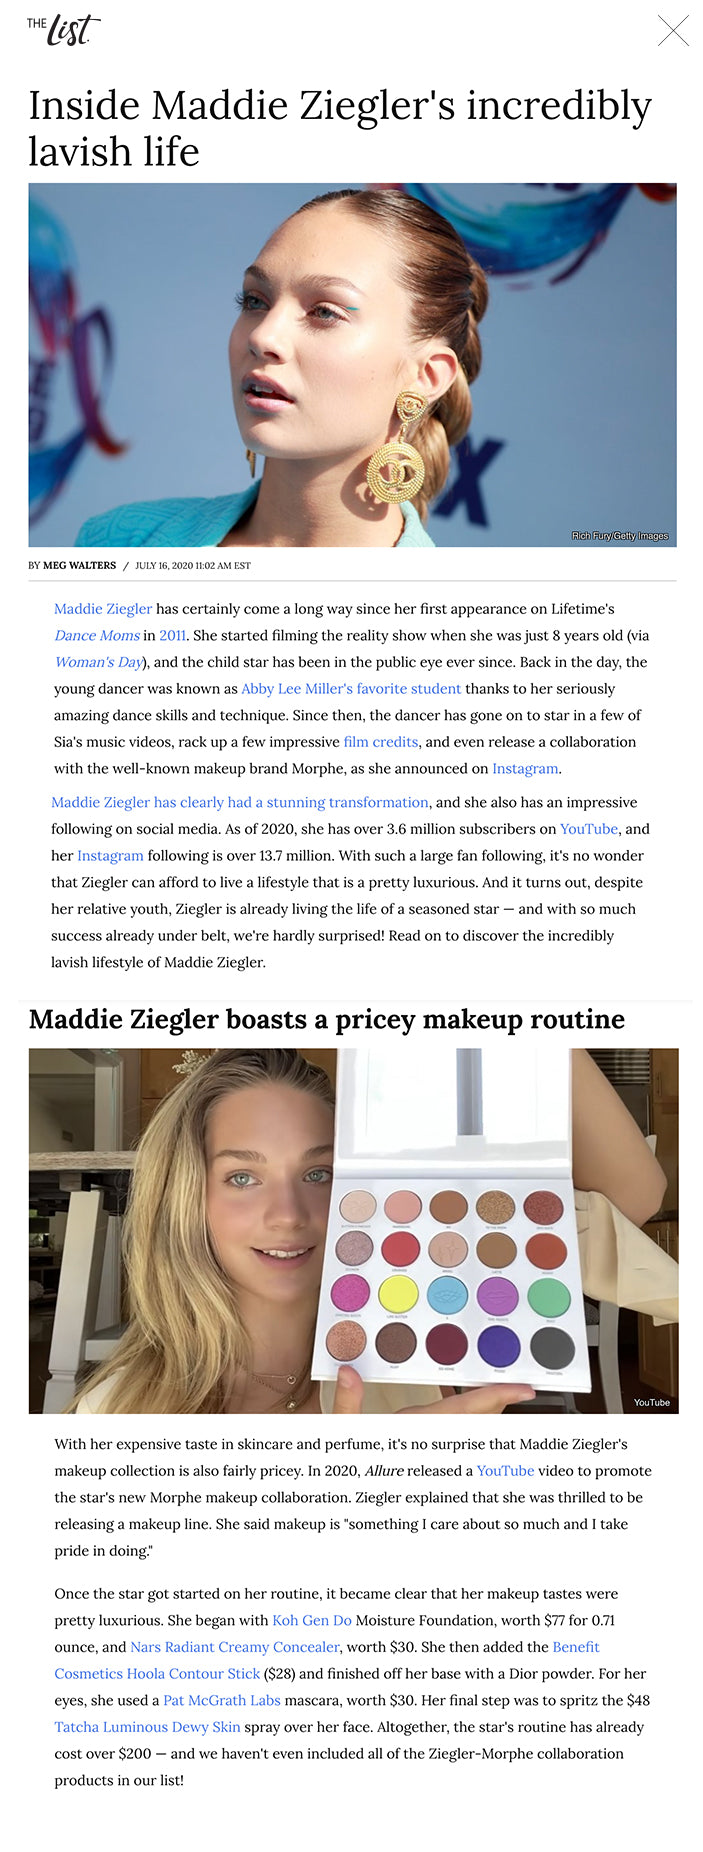 Inside Maddie Ziegler's incredibly lavish life Rich Fury/Getty Images BY MEG WALTERS/JULY 16, 2020 11:02 AM EST Maddie Ziegler has certainly come a long way since her first appearance on Lifetime's Dance Moms in 2011. She started filming the reality show when she was just 8 years old (via Woman's Day), and the child star has been in the public eye ever since. Back in the day, the young dancer was known as Abby Lee Miller's favorite student thanks to her seriously amazing dance skills and technique. Since then, the dancer has gone on to star in a few of Sia's music videos, rack up a few impressive film credits, and even release a collaboration with the well-known makeup brand Morphe, as she announced on Instagram.   Maddie Ziegler has clearly had a stunning transformation, and she also has an impressive following on social media. As of 2020, she has over 3.6 million subscribers on YouTube, and her Instagram following is over 13.7 million. With such a large fan following, it's no wonder that Ziegler can afford to live a lifestyle that is a pretty luxurious. And it turns out, despite her relative youth, Ziegler is already living the life of a seasoned star — and with so much success already under belt, we're hardly surprised! Read on to discover the incredibly lavish lifestyle of Maddie Ziegler.  Maddie Ziegler has a pretty impressive net worth Michael Tullberg/Getty Images Maddie Ziegler has been in the public eye since Dance Moms began airing on Lifetime. Since then, Ziegler has managed to rake in a jaw-dropping amount of cash. In 2017, Romper did some detective work and investigated Ziegler's various sources of income. According to the publication, Ziegler would have made $2,000 per episode of Dance Moms, giving her a total of $400,000 for the show. While it's unknown how much money Ziegler made from her appearances in Sia's music videos — which have included "Cheap Thrills," "Elastic Heart," "Big Girls Cry," and more – The Blast reported that Ziegler received an $85,000 pay check for her role in Sia's directorial debut, a musical drama film, along with more money should she be nominated for or win certain awards and a percentage of profits made from merchandise. Not too shabby!    While it's hard to say exactly how much the star is worth after all of her various gigs over the years, Celebrity Net Worth estimated Ziegler, who's also released books, is worth $5 million as of 2020. That is some serious cash for a teenager! No wonder the star can afford to live in luxury.  Maddie Ziegler's family home is seriously luxurious Vivien Killilea/Getty Images Knowing the dancer's net worth, it comes as no surprise that Maddie Ziegler's home is pretty extravagant. According to TMZ, the star and her family made a major upgrade in 2015. Apparently, they purchased a "million dollar custom-built home." The family's previous home, according to TMZ, was only 2,500 square feet and sold quickly for $279,000 — it's clear that the new home was a huge upgrade. The extravagant new Ziegler house reportedly spans 7,000 square feet, and contain a range of enviable amenities, including a pool, a basement dance studio, and even a personal shoe closet for Ziegler.    In Ziegler's 2017 room tour video, the star gave her fans an insider glimpse of her bedroom in the home. The spacious room features a massive movie set-style vanity, an en-suite bathroom, and a large walk-in closet. She even had impressive Christmas decorations up at the time, including a gigantic Christmas tree. Talk about luxurious living! At least Ziegler understood that her house and bedroom really are extravagant. "I am very fortunate to have the room I do," she stated at the end of the video.  Maddie Ziegler has expensive taste in skincare Instagram In 2018, Maddie Ziegler released a YouTube video in which she let fans in on her morning skincare routine. The star began the routine by using the Tatcha Silk Cream Moisturizer, a product worth a staggering $120. Previously in 2017, the star shared her more extensive evening skincare regimen that she claimed cleared her skin of acne after her tour with Sia. One of the priciest products she listed was the La Mer Soft Cream Moisturizer, which goes for a shocking $335 for a two-ounce jar. "My mom gave this to me as a present," Ziegler was quick to add, explaining that she wouldn't have purchased such an expensive product herself. At least she realized that the price tag was a bit hefty, especially for a teenager!   Despite owning a few expensive products, Ziegler doesn't mind using drugstore staples either. In her nighttime routine, she explained that slightly cheaper, everyday brands like Neutrogena, Cetaphil, and Clinique work wonders for her too. We love how down to earth Ziegler is about her skincare!  Maddie Ziegler uses this lavish signature scent Instagram In 2020, Maddie Ziegler shared a YouTube video in which she showed her fans an average day in her life at home. After she completed her workout, shower, and skincare routine, the star grabbed a bottle of her favorite perfume. "This right here is my go-to scent," Ziegler claimed. "I've been using it for two years, maybe three, and I just don't know the day we're going to part. I just don't think it's going to happen," she said, before announcing that the scent was Si by Giorgio Armani. According to Armani's website, a full-sized, 3.4-ounce bottle of this "chic, voluptuous, intense, and soft" luxury perfume goes for a steep $126! If Ziegler has been using this perfume for years, just imagine how much money has gone into her perfume collection.   While Armani might be Maddie Ziegler's "go-to" brand, she's also had a sponsorship deal with Marc Jacobs. In 2018, the star posted a photo posing with their signature Daisy perfume at an event.  Maddie Ziegler boasts a pricey makeup routine YouTube With her expensive taste in skincare and perfume, it's no surprise that Maddie Ziegler's makeup collection is also fairly pricey. In 2020, Allure released a YouTube video to promote the star's new Morphe makeup collaboration. Ziegler explained that she was thrilled to be releasing a makeup line. She said makeup is "something I care about so much and I take pride in doing."   Once the star got started on her routine, it became clear that her makeup tastes were pretty luxurious. She began with Koh Gen Do Moisture Foundation, worth $77 for 0.71 ounce, and Nars Radiant Creamy Concealer, worth $30. She then added the Benefit Cosmetics Hoola Contour Stick ($28) and finished off her base with a Dior powder. For her eyes, she used a Pat McGrath Labs mascara, worth $30. Her final step was to spritz the $48 Tatcha Luminous Dewy Skin spray over her face. Altogether, the star's routine has already cost over $200 — and we haven't even included all of the Ziegler-Morphe collaboration products in our list!  Maddie Ziegler often wears pricey activewear thanks to this major celeb Instagram In 2019, Maddie Ziegler released a line of workout clothing with actress Kate Hudson's company Fabletics, as reported by Us Weekly. In 2020, Ziegler announced a second line of activewear with the company. Apparently, Ziegler's relationship with Hudson began on the set for Sia's movie Music. Discussing her first line with the company, Ziegler explained to Us Weekly in 2019, "When we had rehearsals, Kate would bring me a lot of Fabletics clothes, and one day she asked me to do a collaboration and I thought it was super fitting since I'm a dancer, so it kind of just worked out pretty well."    Fabletics outfits certainly aren't cheap — some of them can cost over over $200! So, talk about having friends in the right places. And judging by Maddie Ziegler's Instagram page, she has plenty of stylish Fabletics leggings and sports bras In her personal collection from which to choose! Seems like it really pays to be friends with Kate Hudson, who's had her own stunning transformation over the years!  Sia gave Maddie Ziegler this expensive car for her birthday Instagram Maddie Ziegler and singer Sia have been close friends since 2014, when Ziegler appeared in Sia's music video for "Chandelier." Since then, Ziegler has appeared in several of Sia's videos, and she has even been on tour with the singer (via Billboard). In 2019, Ziegler announced on The Tonight Show that Sia is now her official godmother!   When Ziegler turned 16 in 2018, Sia certainly didn't pull any punches on the gift. Ziegler posted a picture of the extravagant present from Sia on Instagram, revealing it was a brand new Audi with a giant red bow on the hood! "Sweet sixteen," Ziegler wrote in the caption. "Can't believe this car is actually mine!!" Sia also posted pictures of the pair hugging in front of the car on Instagram, writing, "Happy Birthday to my most special noonoo." According to W magazine, this type of Audi is a Q3 truck, a vehicle that starts at $32,900! It sounds like Ziegler definitely travels in style thanks to her generous godmother.  Maddie Ziegler has been receiving pricey gifts for years Todd Williamson/Getty Images Maddie Ziegler's 16th birthday gift from Sia was pretty impressive, but it certainly wasn't the first expensive present that the star had received. It turns out, the dancer has been receiving luxurious gifts from friends and family for years. In the Dance Moms Holiday Special, Abby Lee Miller gave Ziegler a pair of pink custom-made tap boots. And if that wasn't enough, she also threw in a $5,000 shopping spree. Seems like being on a reality dance show can really pay off!    A few years later, a few more pricey gifts were reported. According to TMZ, Ziegler's 13th birthday in 2015 was also pretty extravagant. Apparently, among her gifts were an Apple Watch and a pair of real diamond stud earrings — not bad for a teenager!  Unfortunately, Maddie Ziegler hasn't always received gifts that she has enjoyed. In 2017, she spoke to Galore and explained the weirdest gift she has ever been given by a fan. The star explained that when she was 9 years old, "This girl brought me this huge box." And what was inside? A huge grandfather clock with her name engraved on it! "It was the creepiest thing," Ziegler said. It's clear that some extravagant gifts are better than others!   Maddie Ziegler partnered with the luxury jewelry brand Tiffany & Co Nicholas Hunt/Getty Images In 2018, Maddie Ziegler took part in a super glamorous campaign with the jewelry brand Tiffany & Co. Ziegler was chosen to be part of the "Believe in Dreams" campaign in 2018, which featured a magical set design following a theme of the company's signature color, "Tiffany blue." In a behind-the-scenes video of the shoot for the campaign, Ziegler explained how extravagant the Tiffany & Co. set was. "The coolest thing about being on set is all the Tiffany blue everything," she gushed. She added, "This is a dream world, and I just happen to be living in it." Sounds like Ziegler really is living the dream — plenty of young women would love to be in her shoes!   In one Instagram clip showing Ziegler shooting for the famous jewelry company, the dancer explained, "I love jewelry — it can actually change the way you feel. It makes me happy when I put jewelry on." Luckily for her, she got to wear some of the most coveted pieces for the campaign!  Maddie Ziegler lives her best life while on tour Refinery29/YouTube Like most stars, Maddie Ziegler seems to be constantly on the move. In 2015, the star was in New York filming a movie. In 2016, she and Sia were on tour promoting Sia's album. In 2017, she and sister Mackenzie Ziegler, who share a unique bond, toured Australia. In 2019, they went on a tour of the UK. Basically, the young star spends a lot of time working away from home. And when she does, the actor and dancer basically lives the dream life of any teen.   In 2016, Refinery29 gave us a glimpse into Ziegler's life on tour. In the video, Ziegler explained, "My favorite part is coming back to the hotel room to just chill and have some me time." And what does that consist of? Well, Ziegler is seen decorating cakes, trying on clothes, cuddling with her dog, and jumping on the bed all in her hotel room. Looks like Ziegler really does live her best life when she's on the road.  Maddie Ziegler has some pretty fancy pieces in her wardrobe Presley Ann/Getty Image In 2018, Teen Vogue did a round up of all of Maddie Ziegler's best fashion moments, and unsurprisingly, the star has worn some pretty pricey designer items over the years. For instance, in 2018, she was spotted wearing a business casual-inspired look, featuring a Kate Spade top, a DROMe skirt, and a pair of Jimmy Choo shoes. Kate Spade's shirts tend to cost around $200, a DROMe skirt can be as much as $900, and Jimmy Choo shoes can be around $500. Not many of us could afford such a pricey outfit!   According to Teen Vogue, Ziegler has also been spotted wearing clothes by high-end designers like Marc Jacobs, Diane Von Furstenberg, Ralph Lauren, and Sergio Rossi. If all of this expensive clothing wasn't enough, she even wore Sia's bridal shower dress on The Tonight Show. "I'm basically like her daughter, and so she's always wanted to dress up her daughter and just put her in different cool clothes," Ziegler told host Jimmy Fallon of how she wound up with Sia's dress. "And this fit like a glove." It really doesn't get better than that!  Maddie Ziegler has been on some pretty extravagant vacations Instagram When Maddie Ziegler isn't at home or off on a film set, chances are she's jetted off on some lavish vacation. In 2016, she and her family took a trip to Aruba. In a video on sister Mackenzie's YouTube channel, we can see Ziegler and her sibling splashing around in a massive hotel pool. Mackenzie also posted a picture on Facebook of the sisters tubing behind a boat. Their trip appeared to be an ideal vacation!  Ziegler has also been to Cabo, Mexico, having visited in both 2018 and 2019. On her 2018 trip, Ziegler traveled with Summer McKeen, a friend and fellow YouTuber. In Ziegler's Instagram photos, the pair can be seen snorkeling and enjoying mocktails against a stunning backdrop. McKeen even posted a video showing off their expansive villa in Mexico, complete with breathtaking ocean views. Then in 2019, the dancer traveled to Cabo with her friend Cameron Field. In a video, Ziegler and Field can be seen lounging around in their holiday home.  Maddie Ziegler's daily routine on her days off is seriously luxurious Instagram When it comes to enjoying lazy days lounging around the house, no one does it better than Maddie Ziegler. In 2020, the star uploaded a video showing her daily routine. She revealed that she started her day with an outdoor workout at around 2:30 p.m. after she woke up and had some breakfast. Yes, 2:30 in the afternoon. The rest of her day involved a shower, an extensive skincare routine, and time with her family. Sounds pretty laid back!  In her book The Maddie Diaries, Ziegler went into more detail about how she likes to spend her days off. She explained that at home in Pittsburgh, she can take time off from her busy schedule and just simply do nothing. She explained that she likes to sleep until 9 or 10 in the morning before hanging out by the pool with her friends. On a busy day, she might go shopping. Most of us would love to spend our days lounging around like this!  Recommended  Trump's Bizarre Comment About Son Barron is Turning Heads  The Affair That Destroyed Meg Ryan's Career  Olivia Wilde & Jason Sudeikis' Sad Update On Their Relationship  The Truth Behind Melania Trump's Head-Turning Transformation Next Up The truth about Maddie Ziegler's relationship with her sister   Read More: https://www.thelist.com/227118/inside-maddie-zieglers-incredibly-lavish-life/?utm_campaign=clip